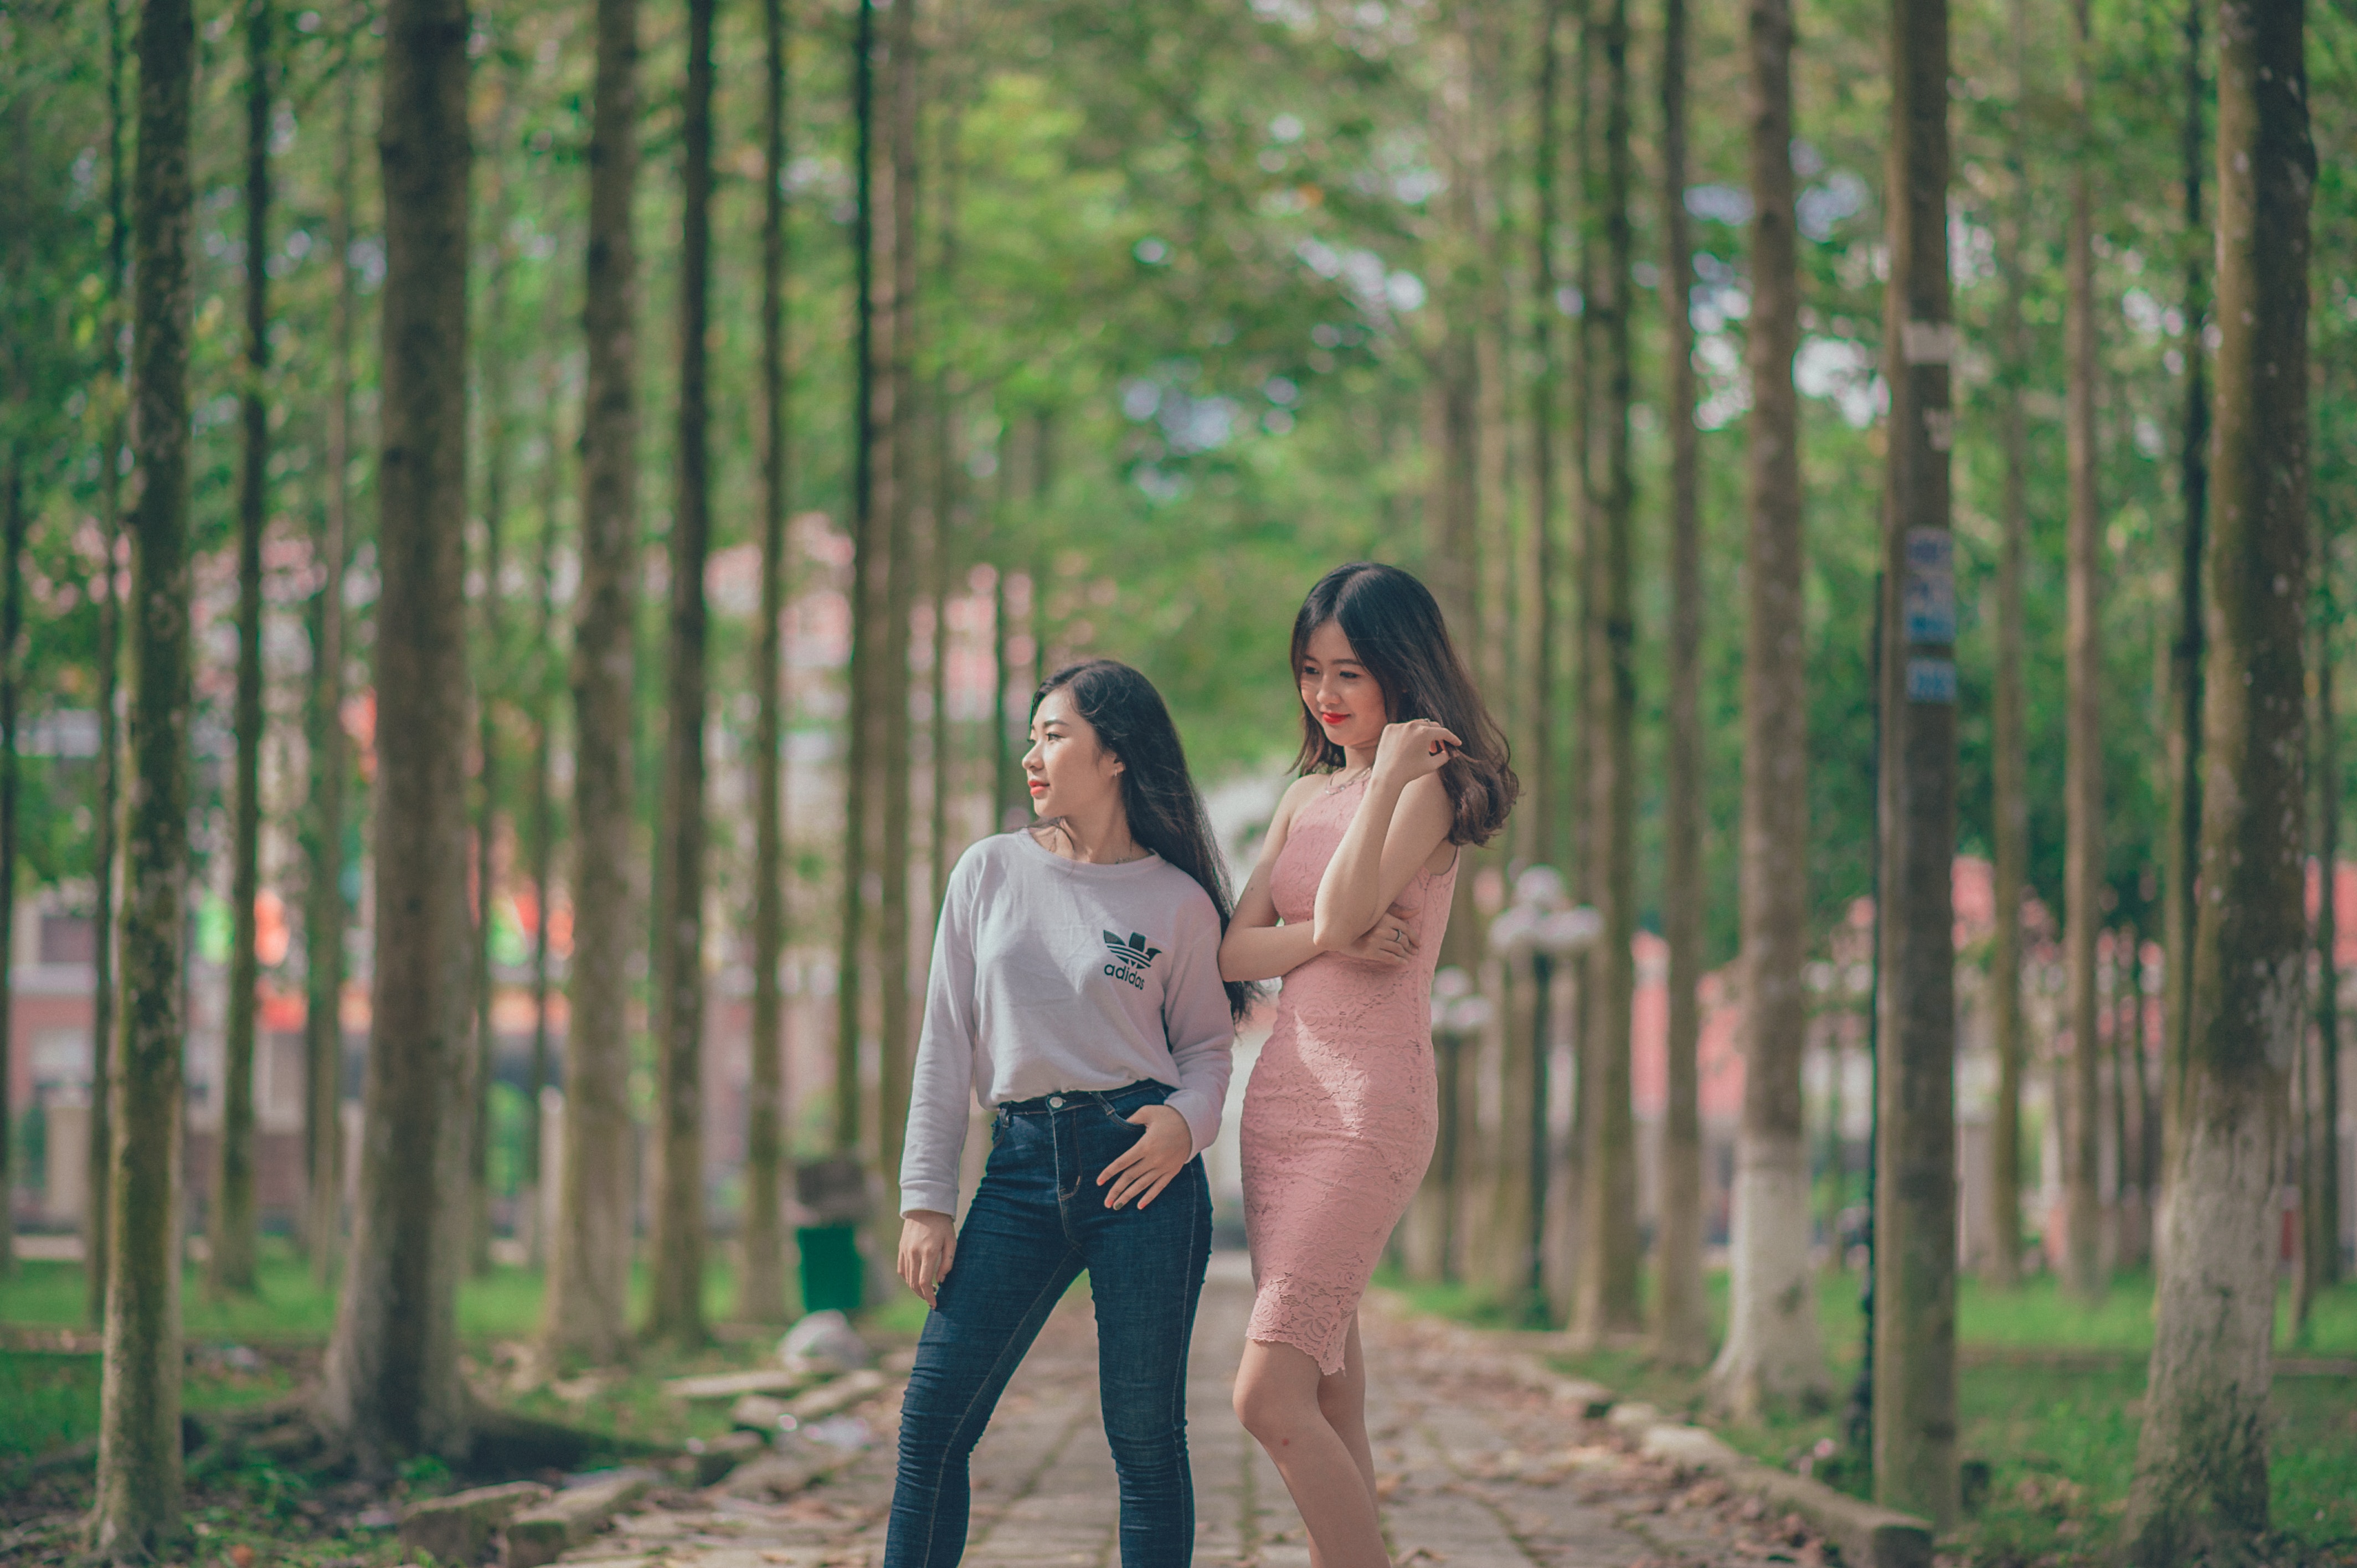 Woman in pencil dress beside woman in gray sweatshirt and blue jeans standing on pathway photo